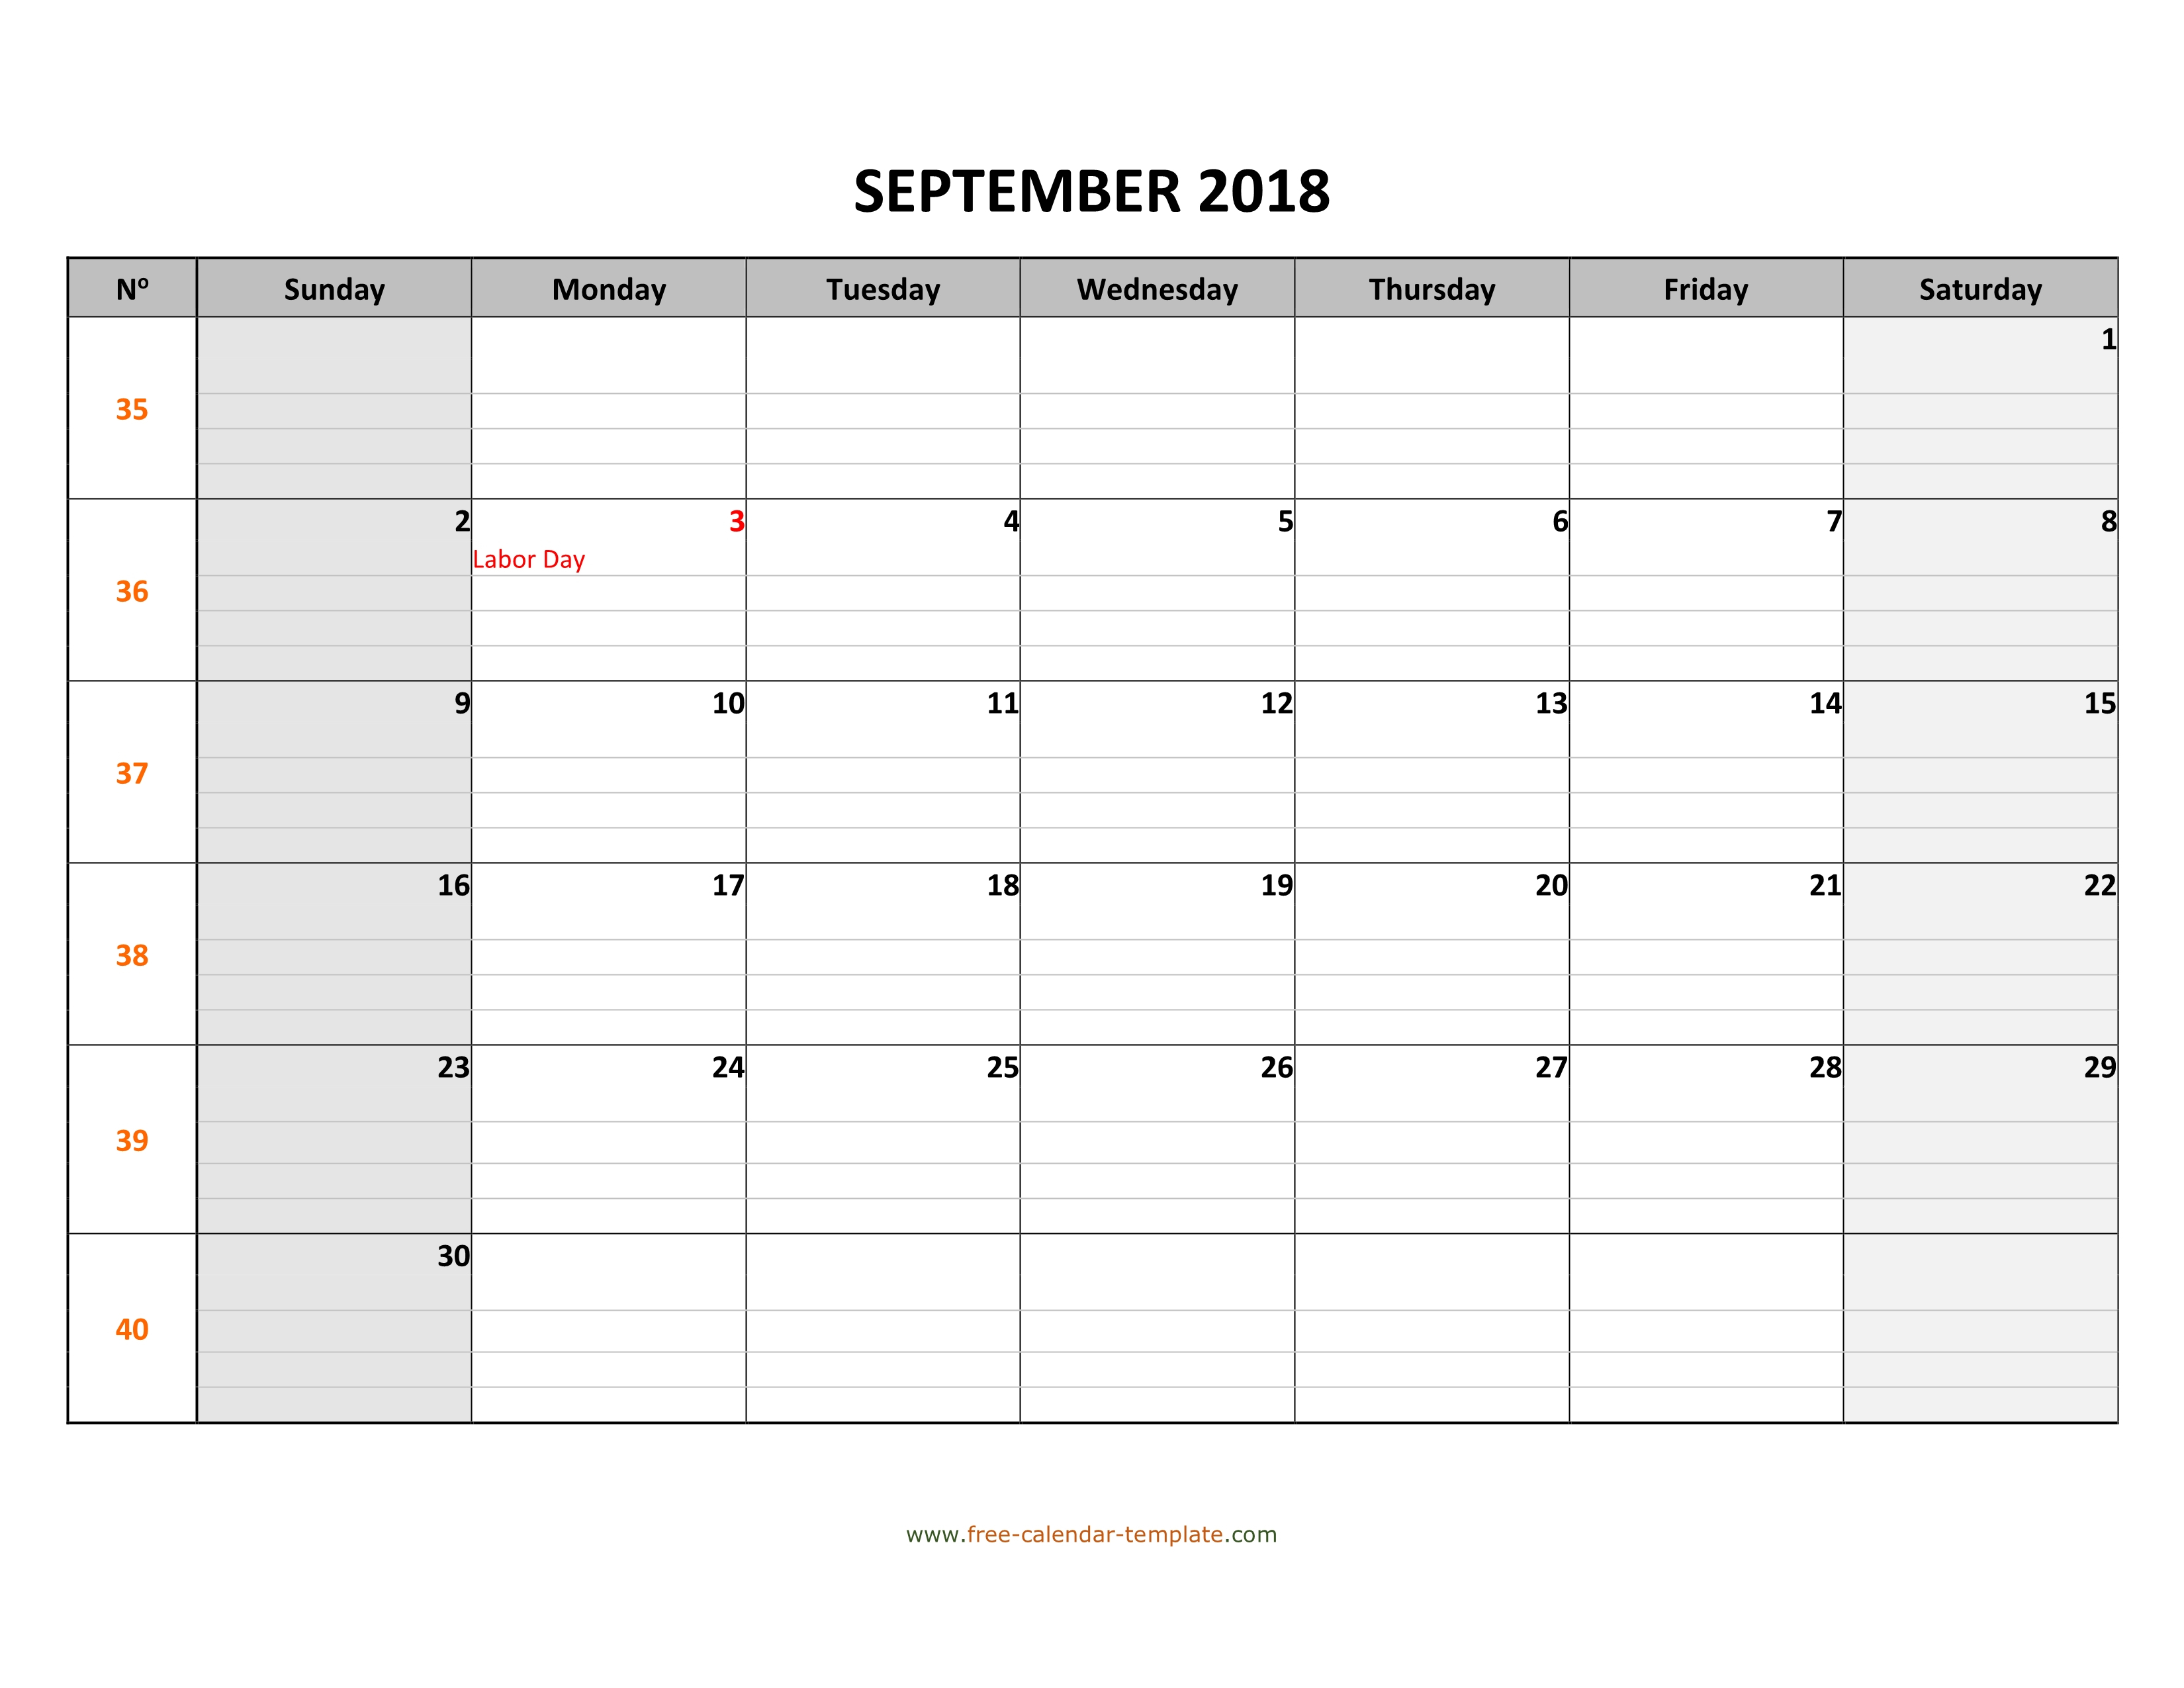 September 2018 Calendar Free Printable With Grid Lines in Blank Calendar With Lines